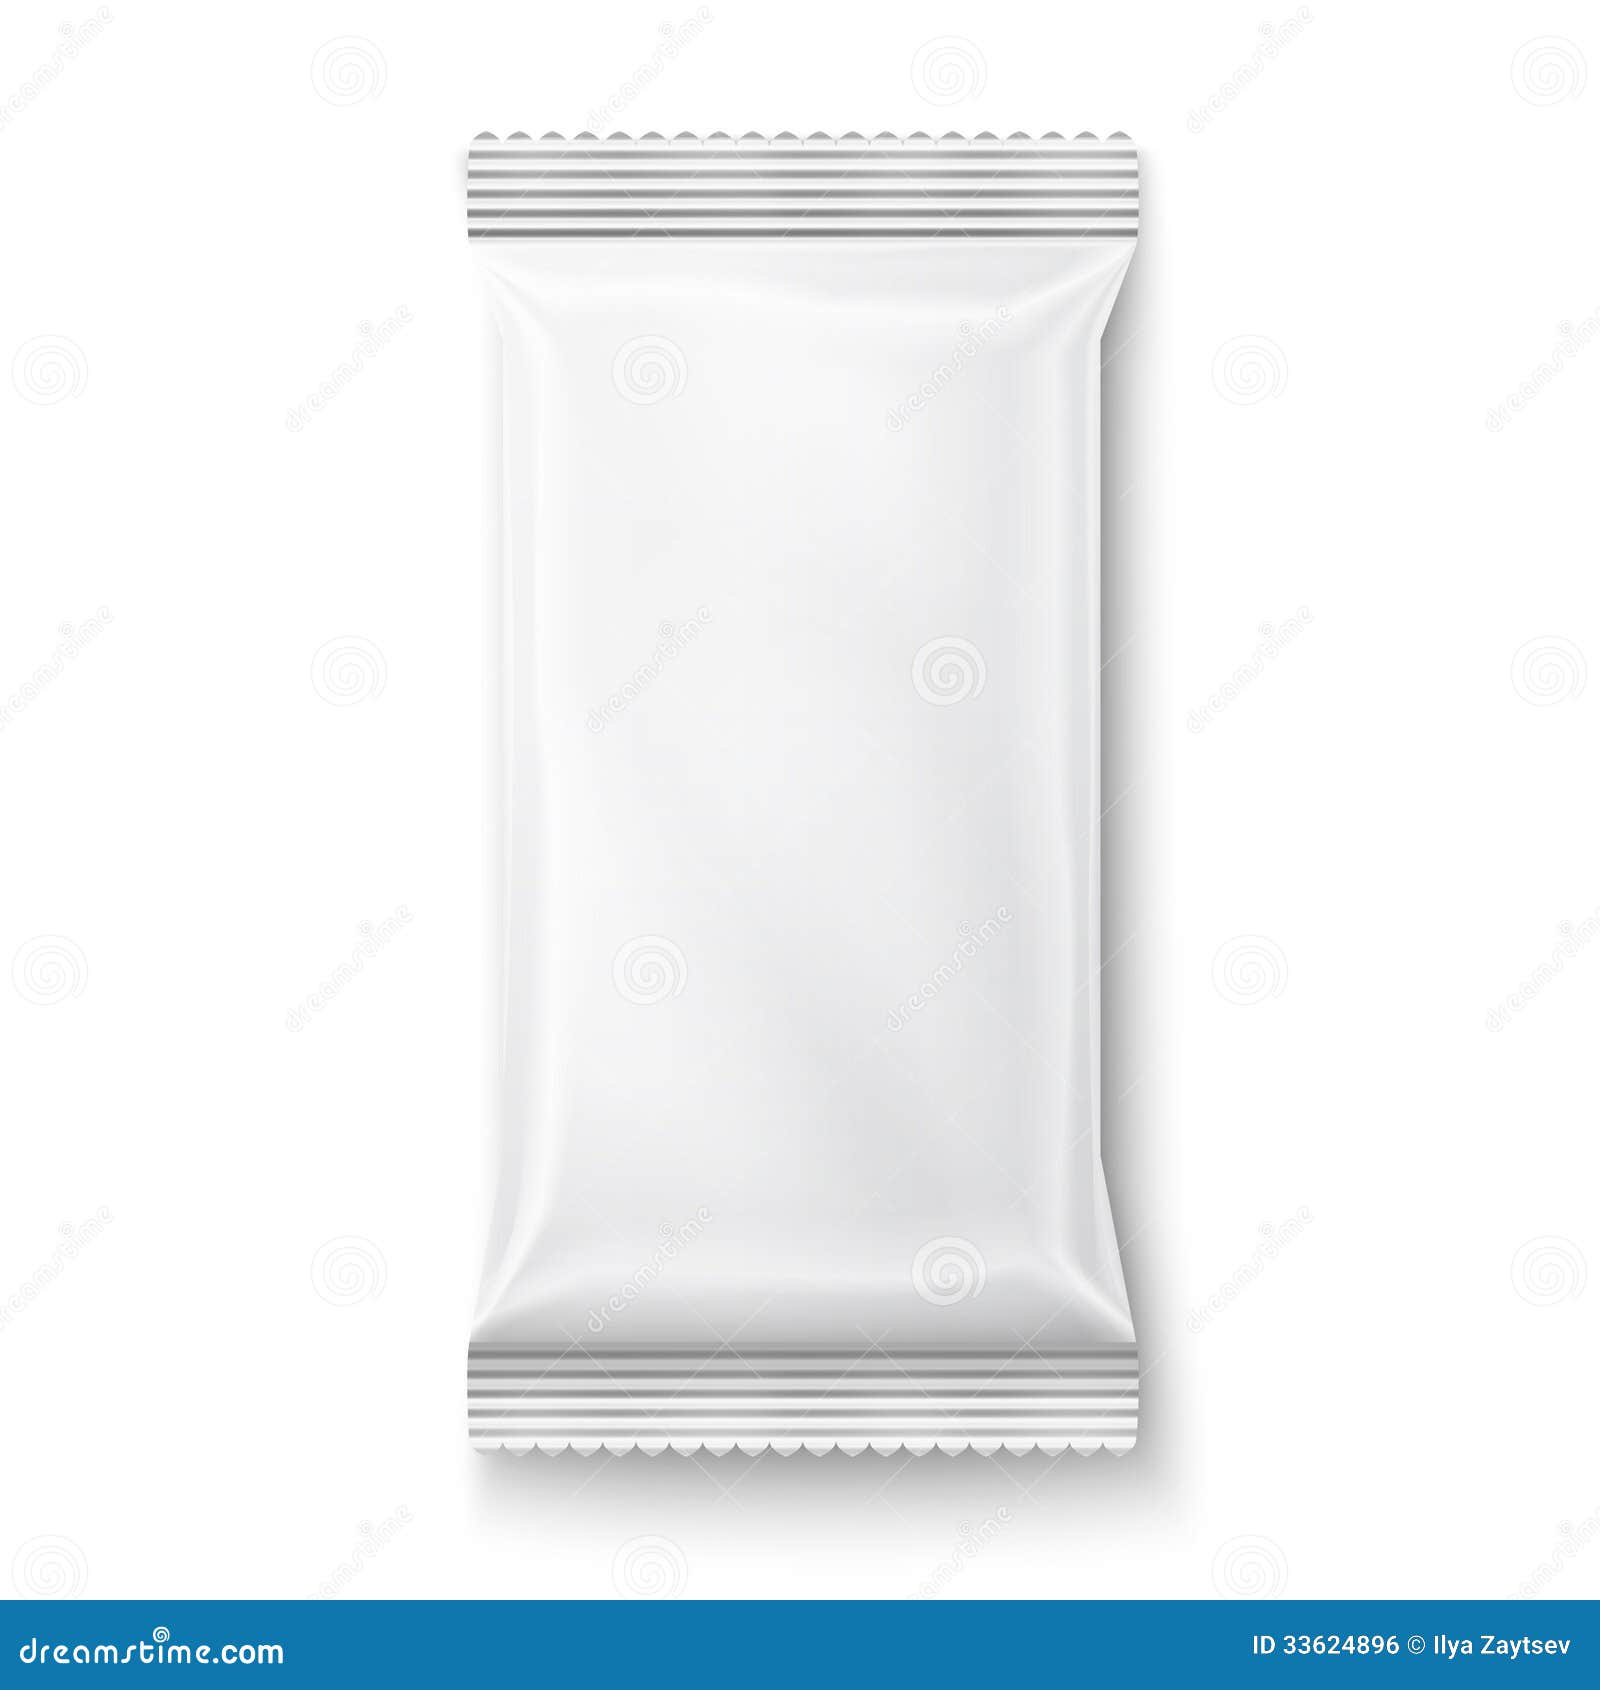 white wet wipes package.